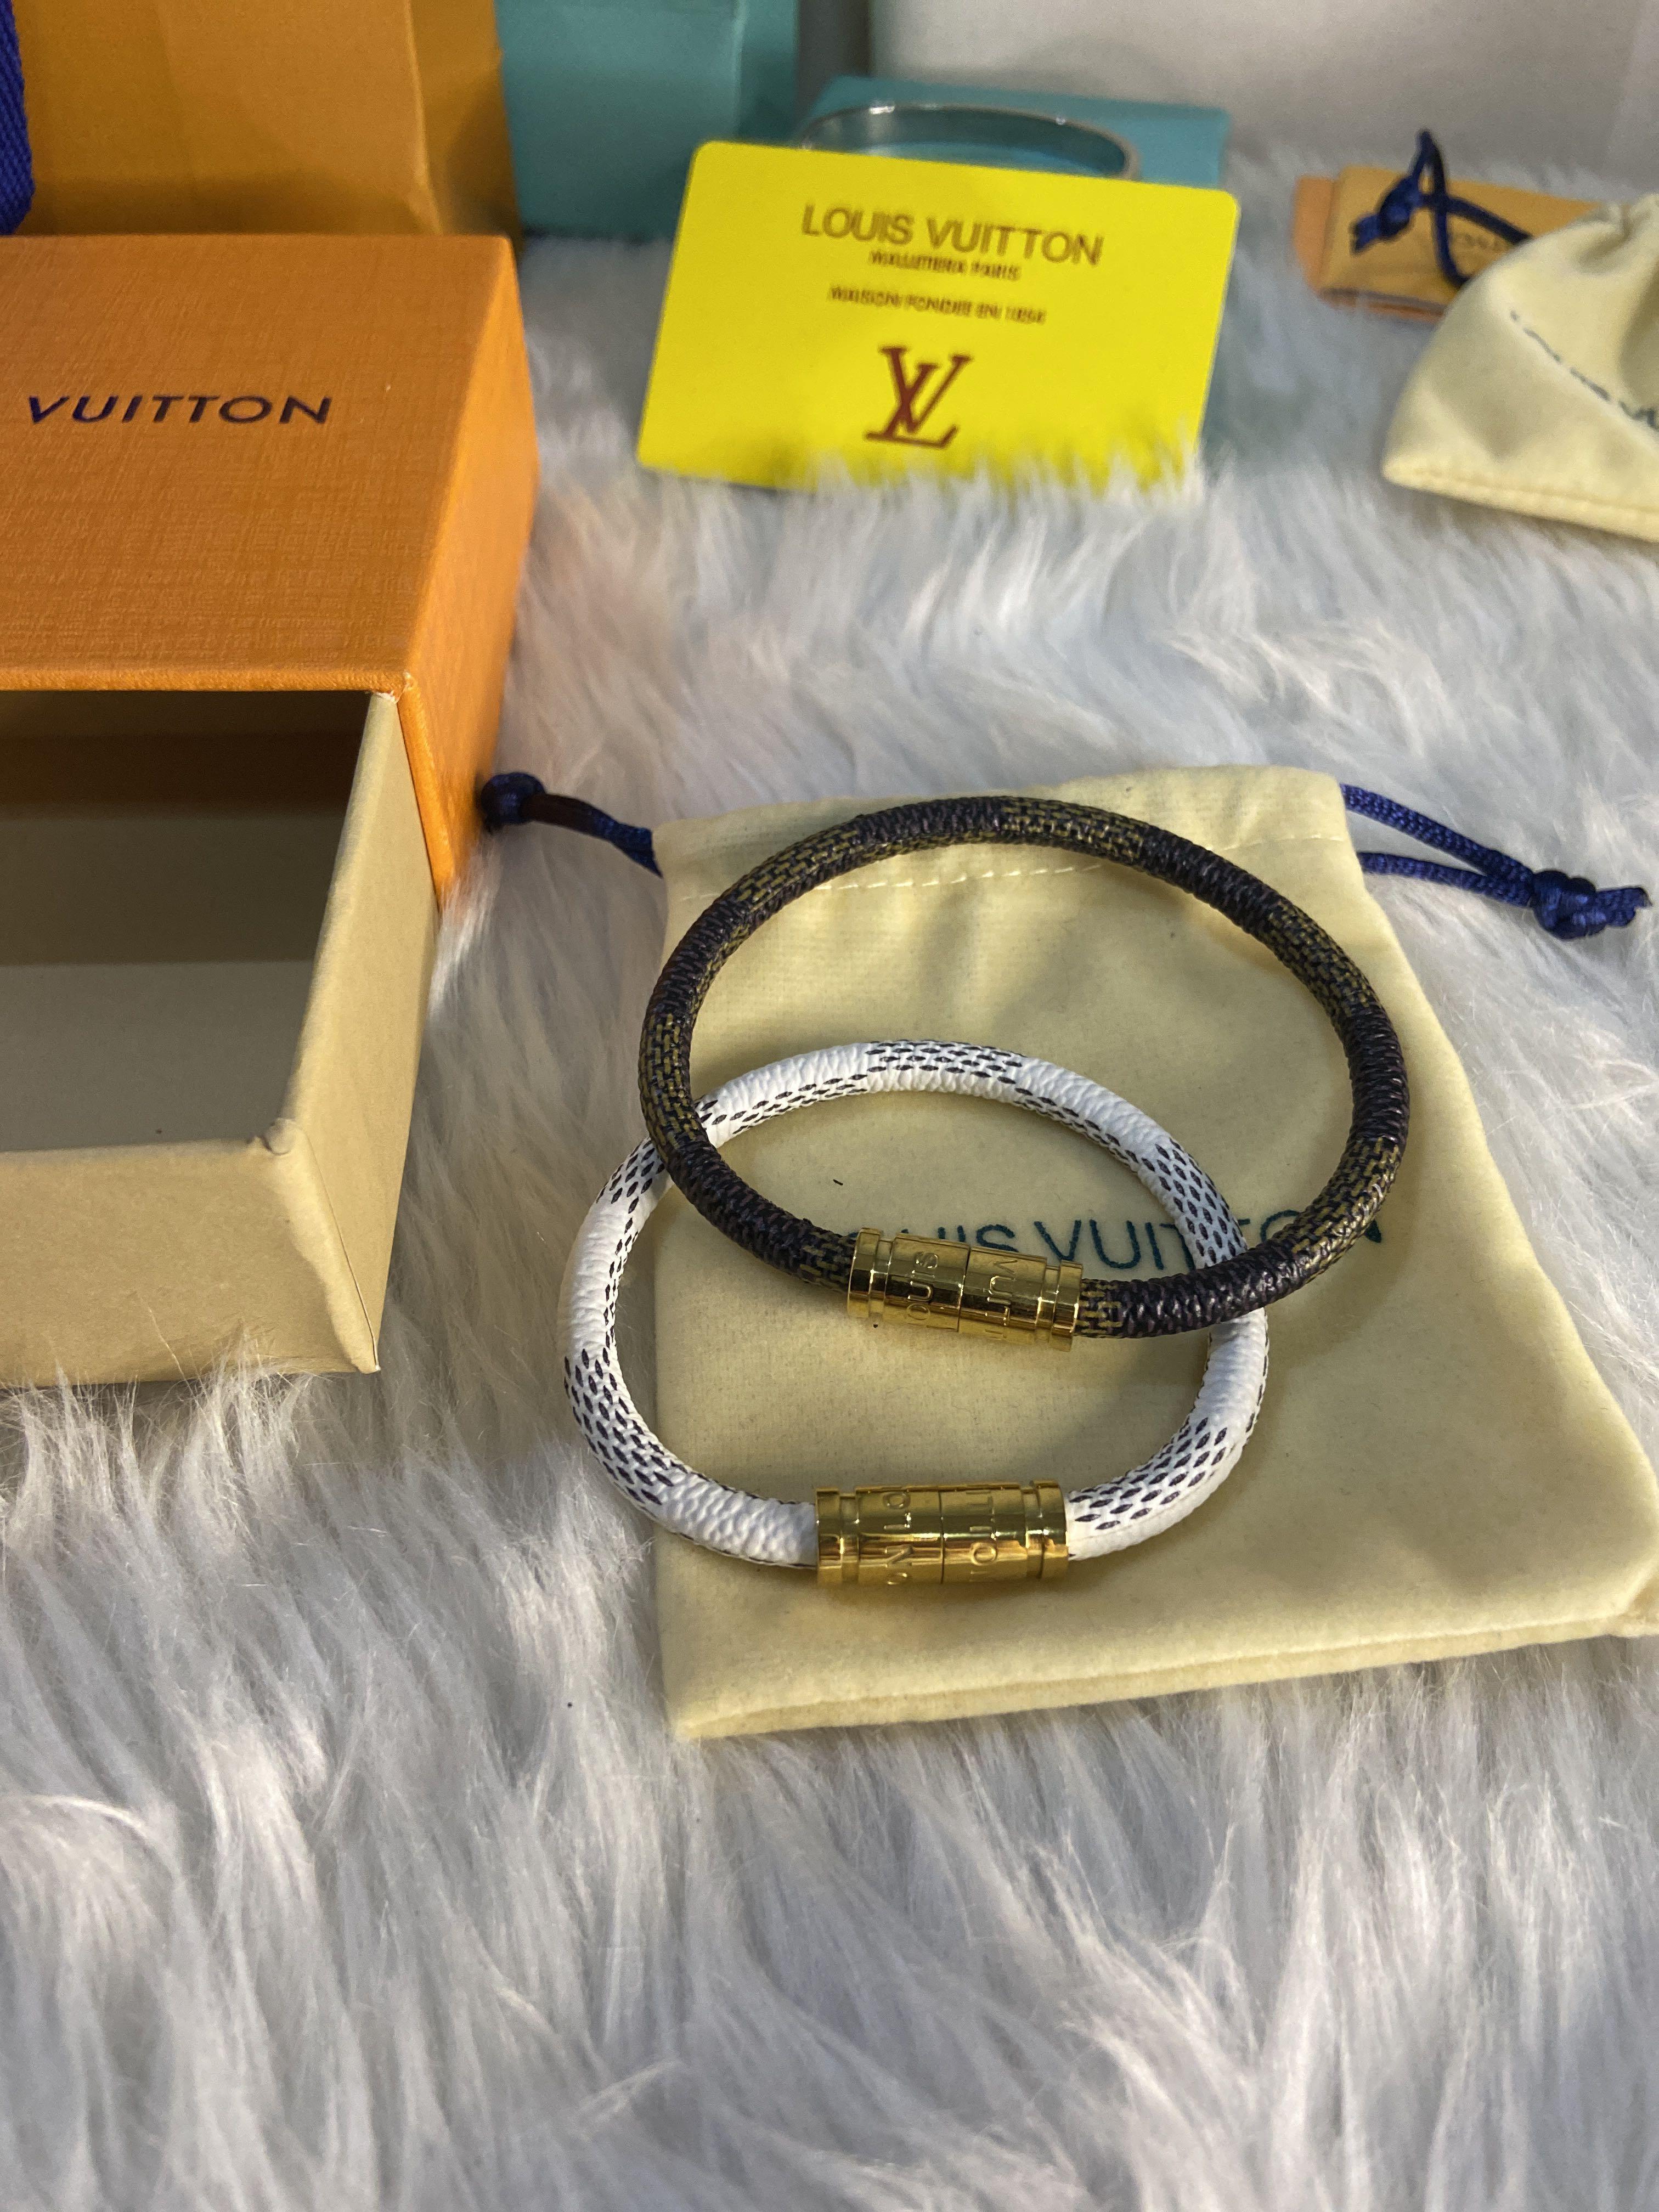 Louis Vuitton gold leather couple/best friend magnetic bracelet damier,  Men's Fashion, Watches & Accessories, Jewelry on Carousell